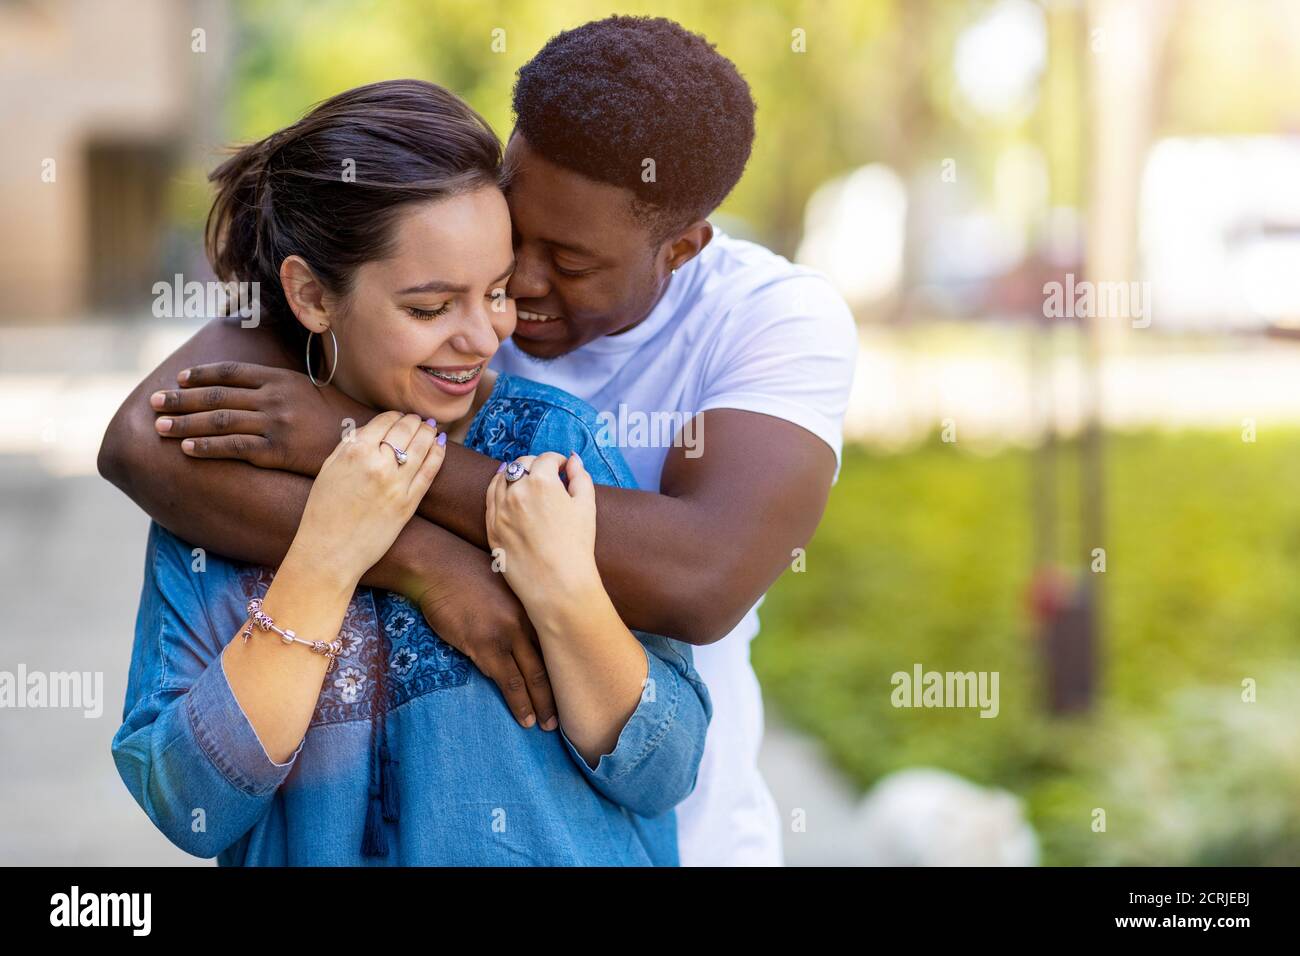 Affectionate multi-ethnic couple embracing outdoors Stock Photo